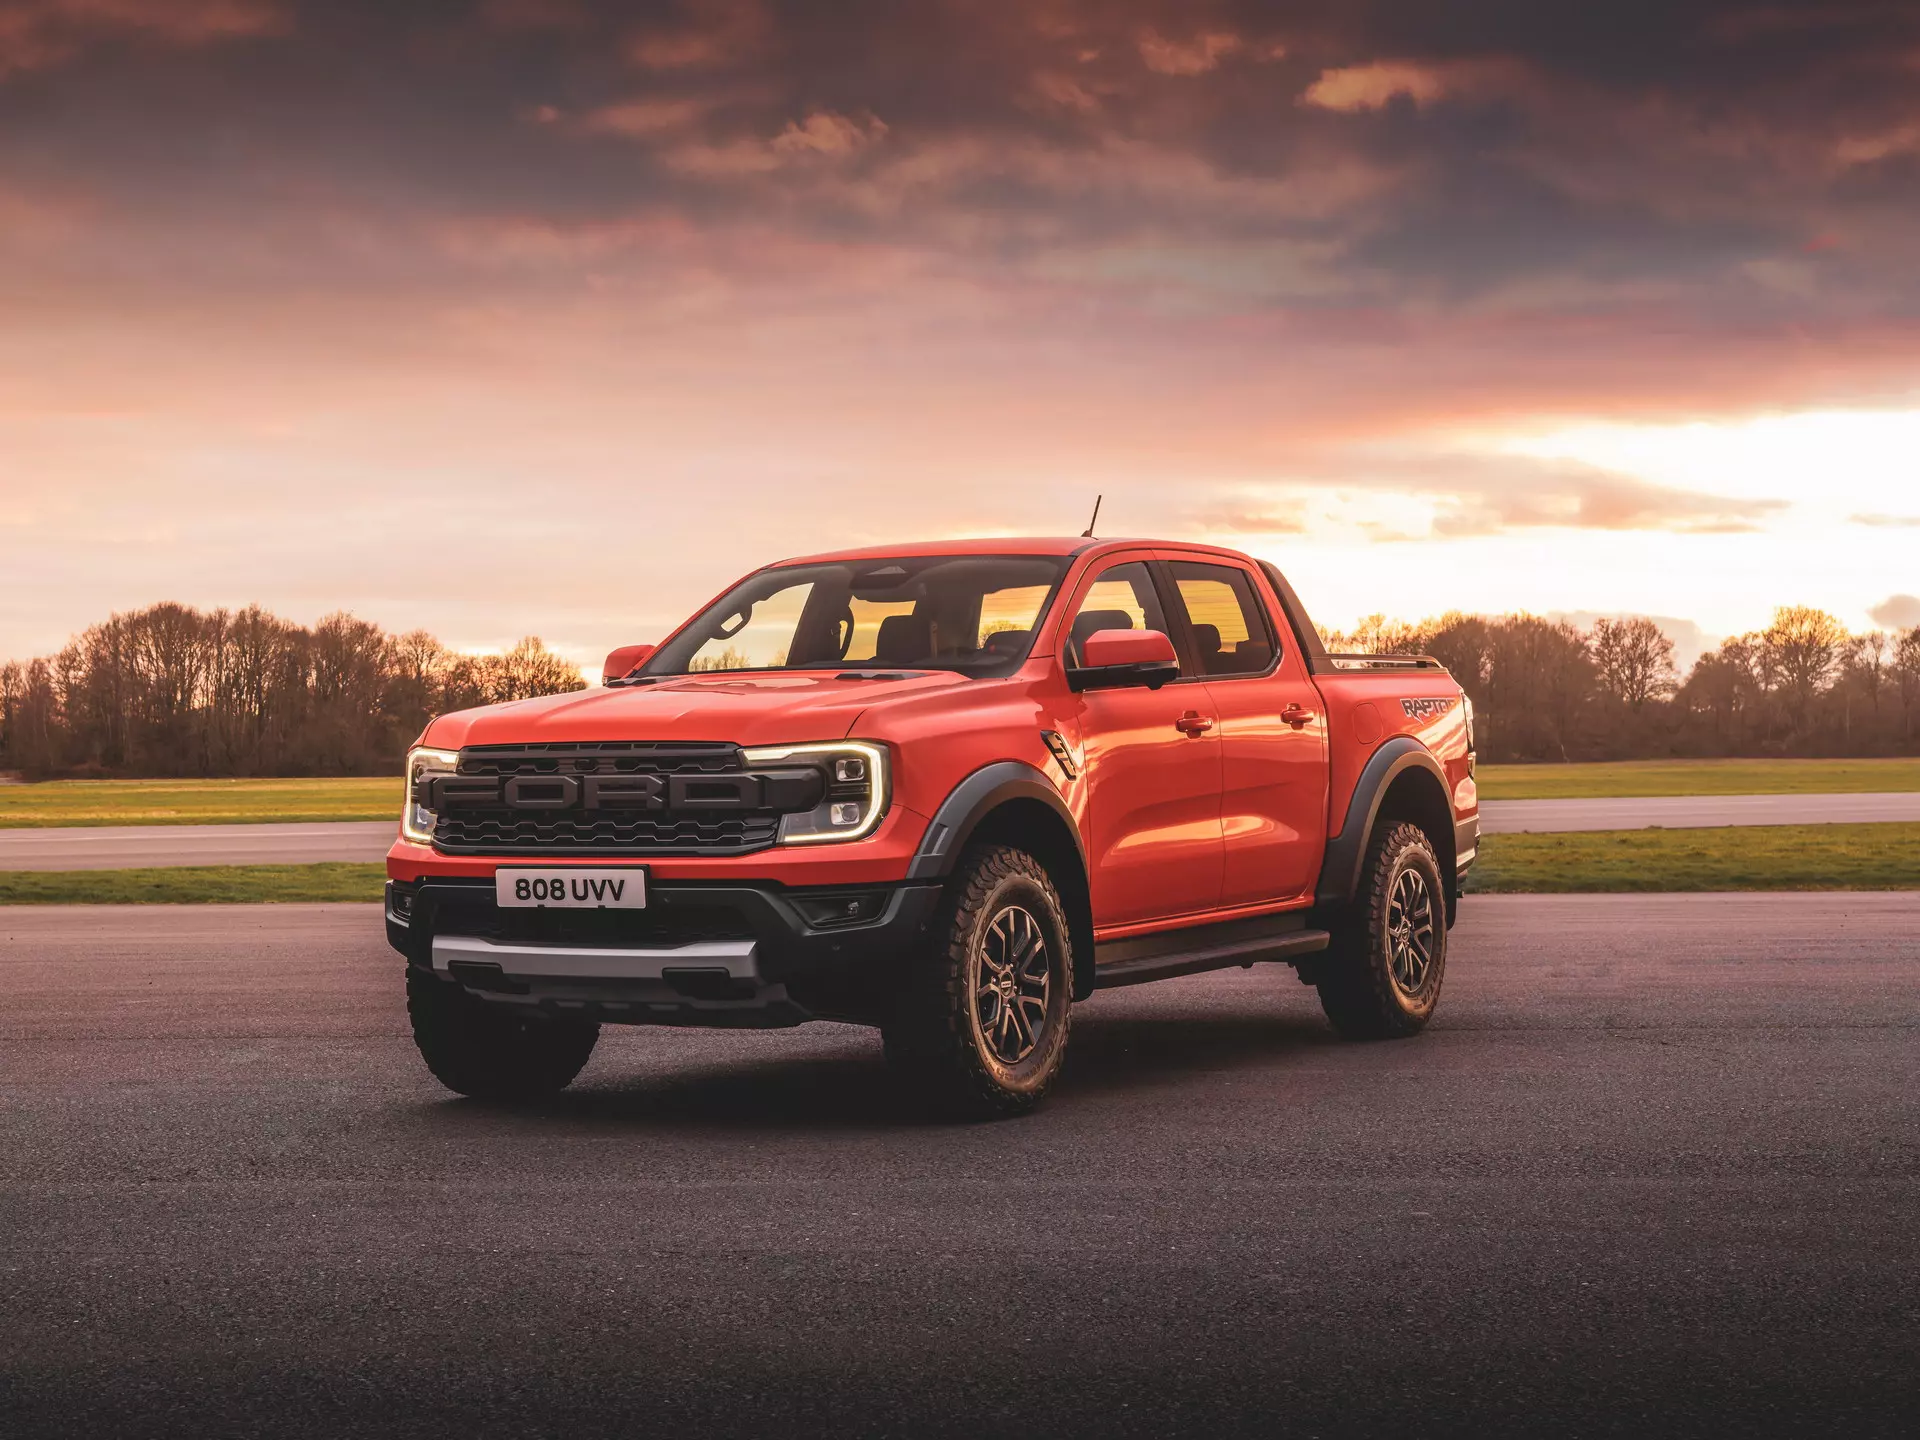 2022 Ford Ranger Raptor Price and Features Announced